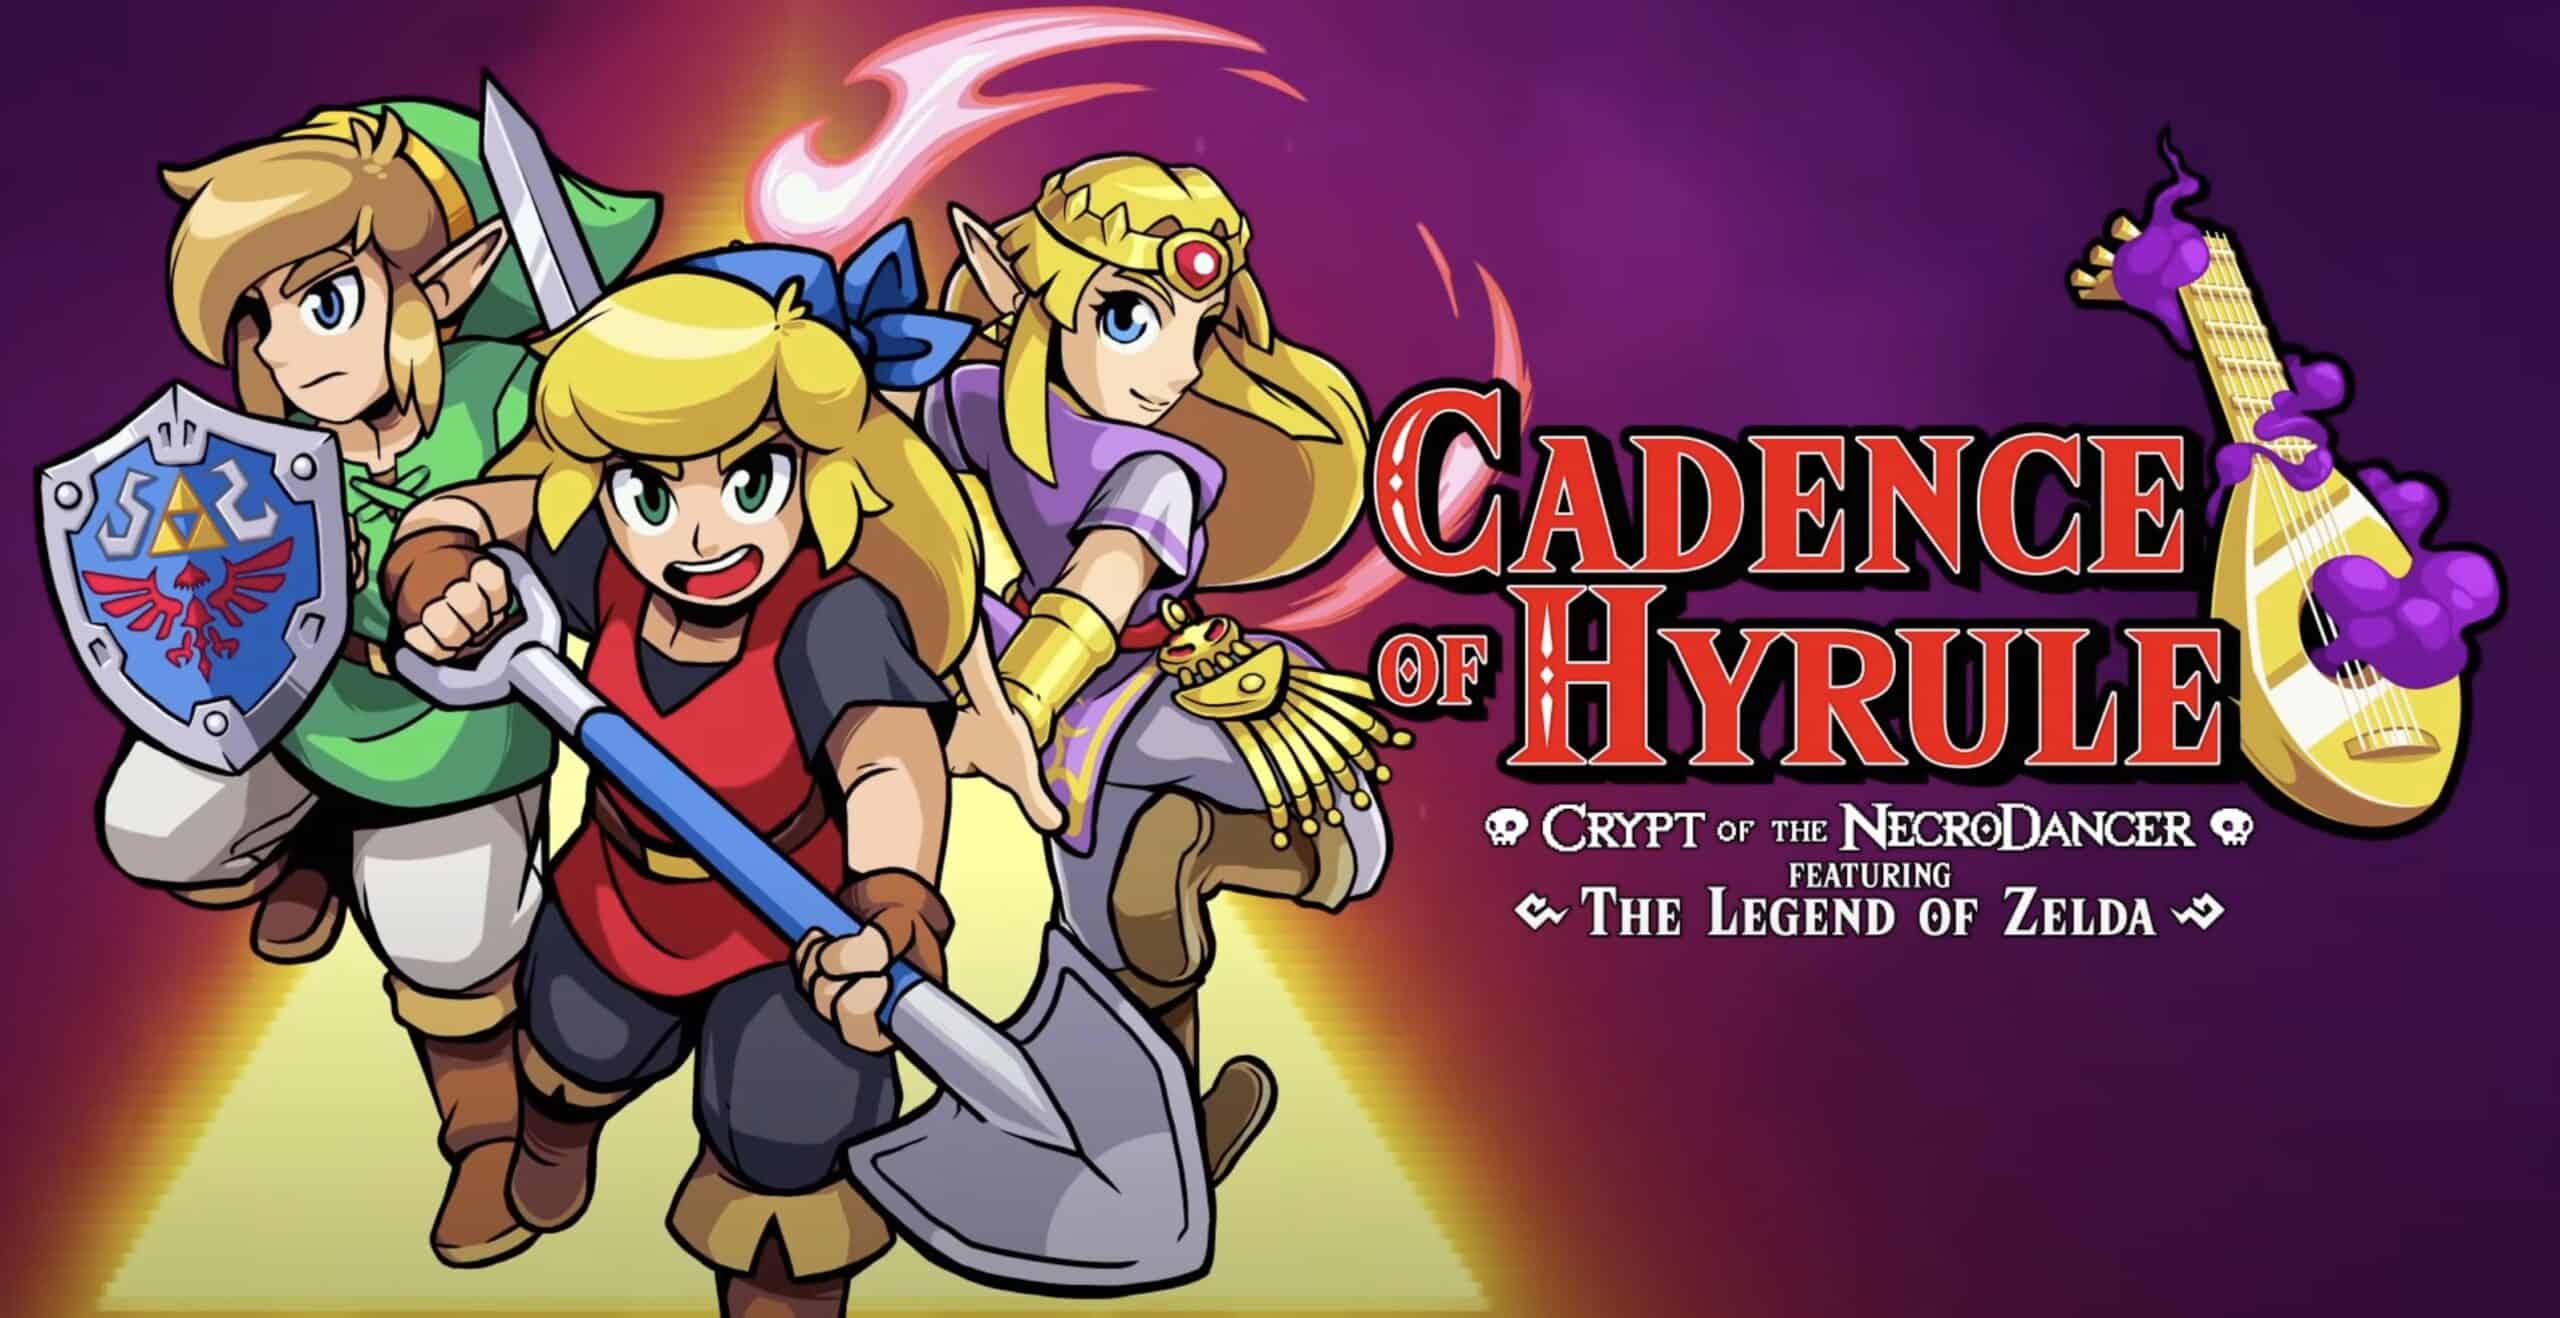 Cadence of Hyrule: Crypt of for Cheat Cheat Central Featuring Zelda Cheats Codes Code 5, One, The the Legend of - Xbox PlayStation Windows, and & More Necrodancer